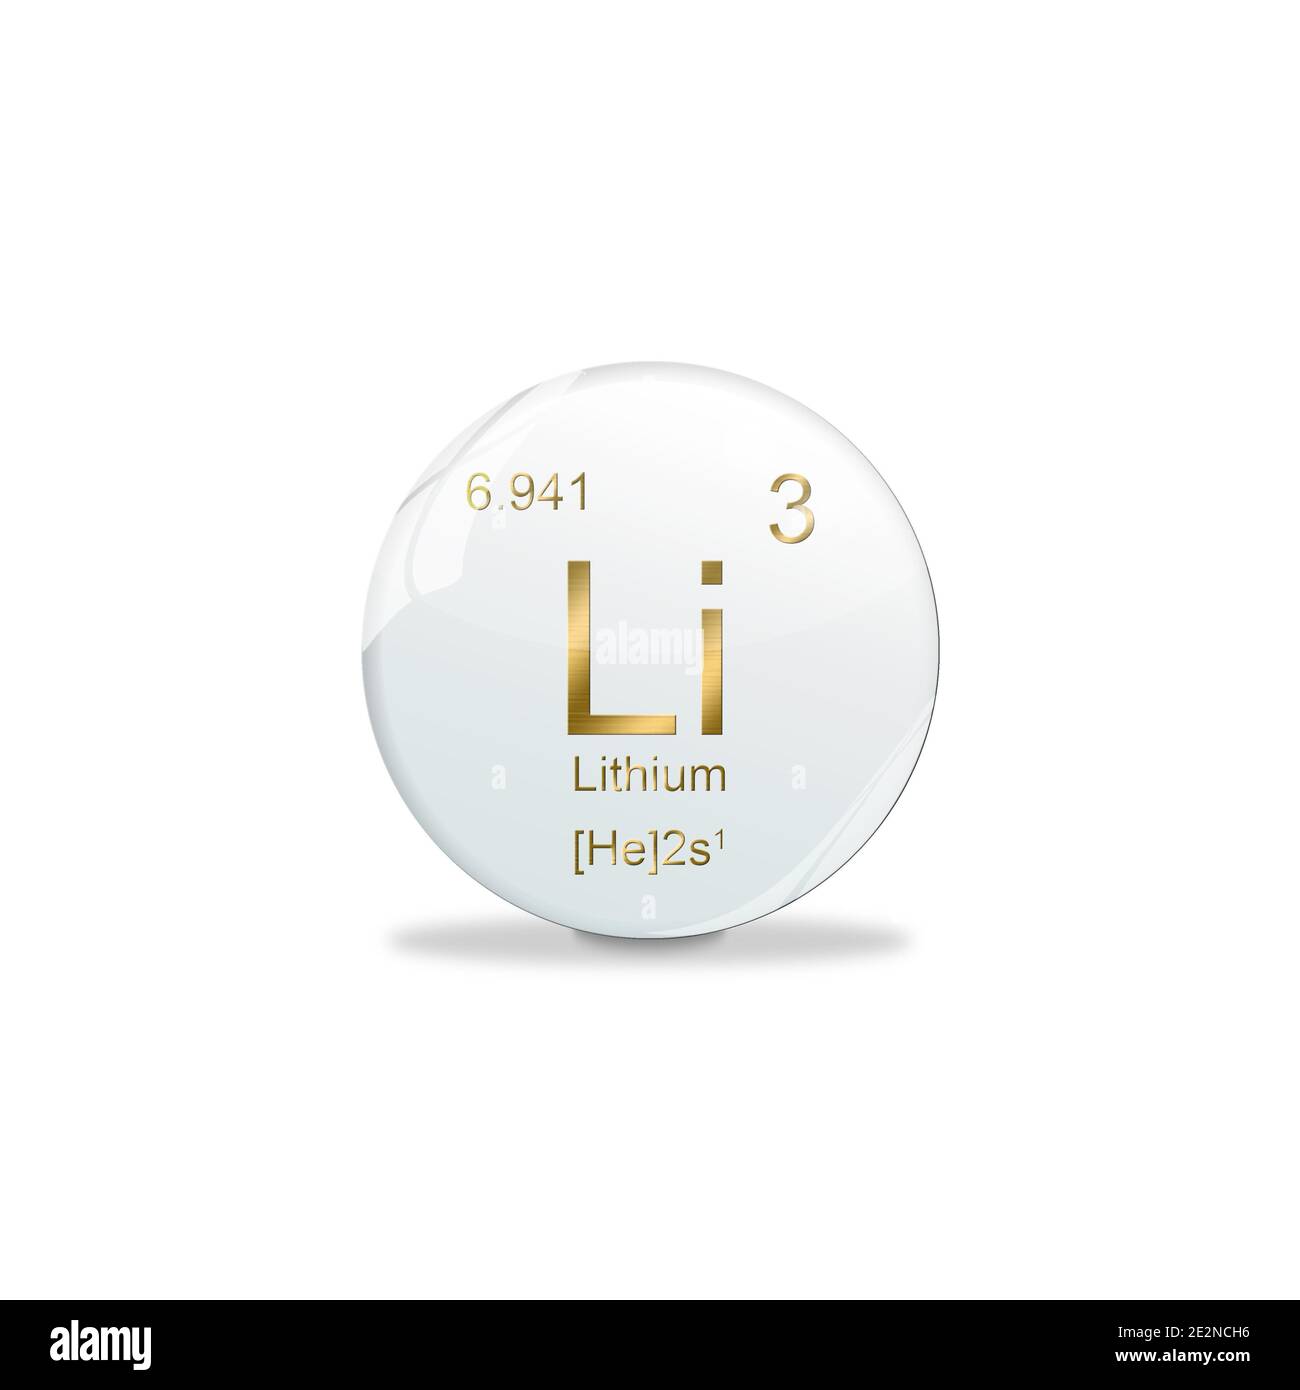 Lithium symbol - Li. Element of the periodic table on white ball with golden signs. White background Stock Photo